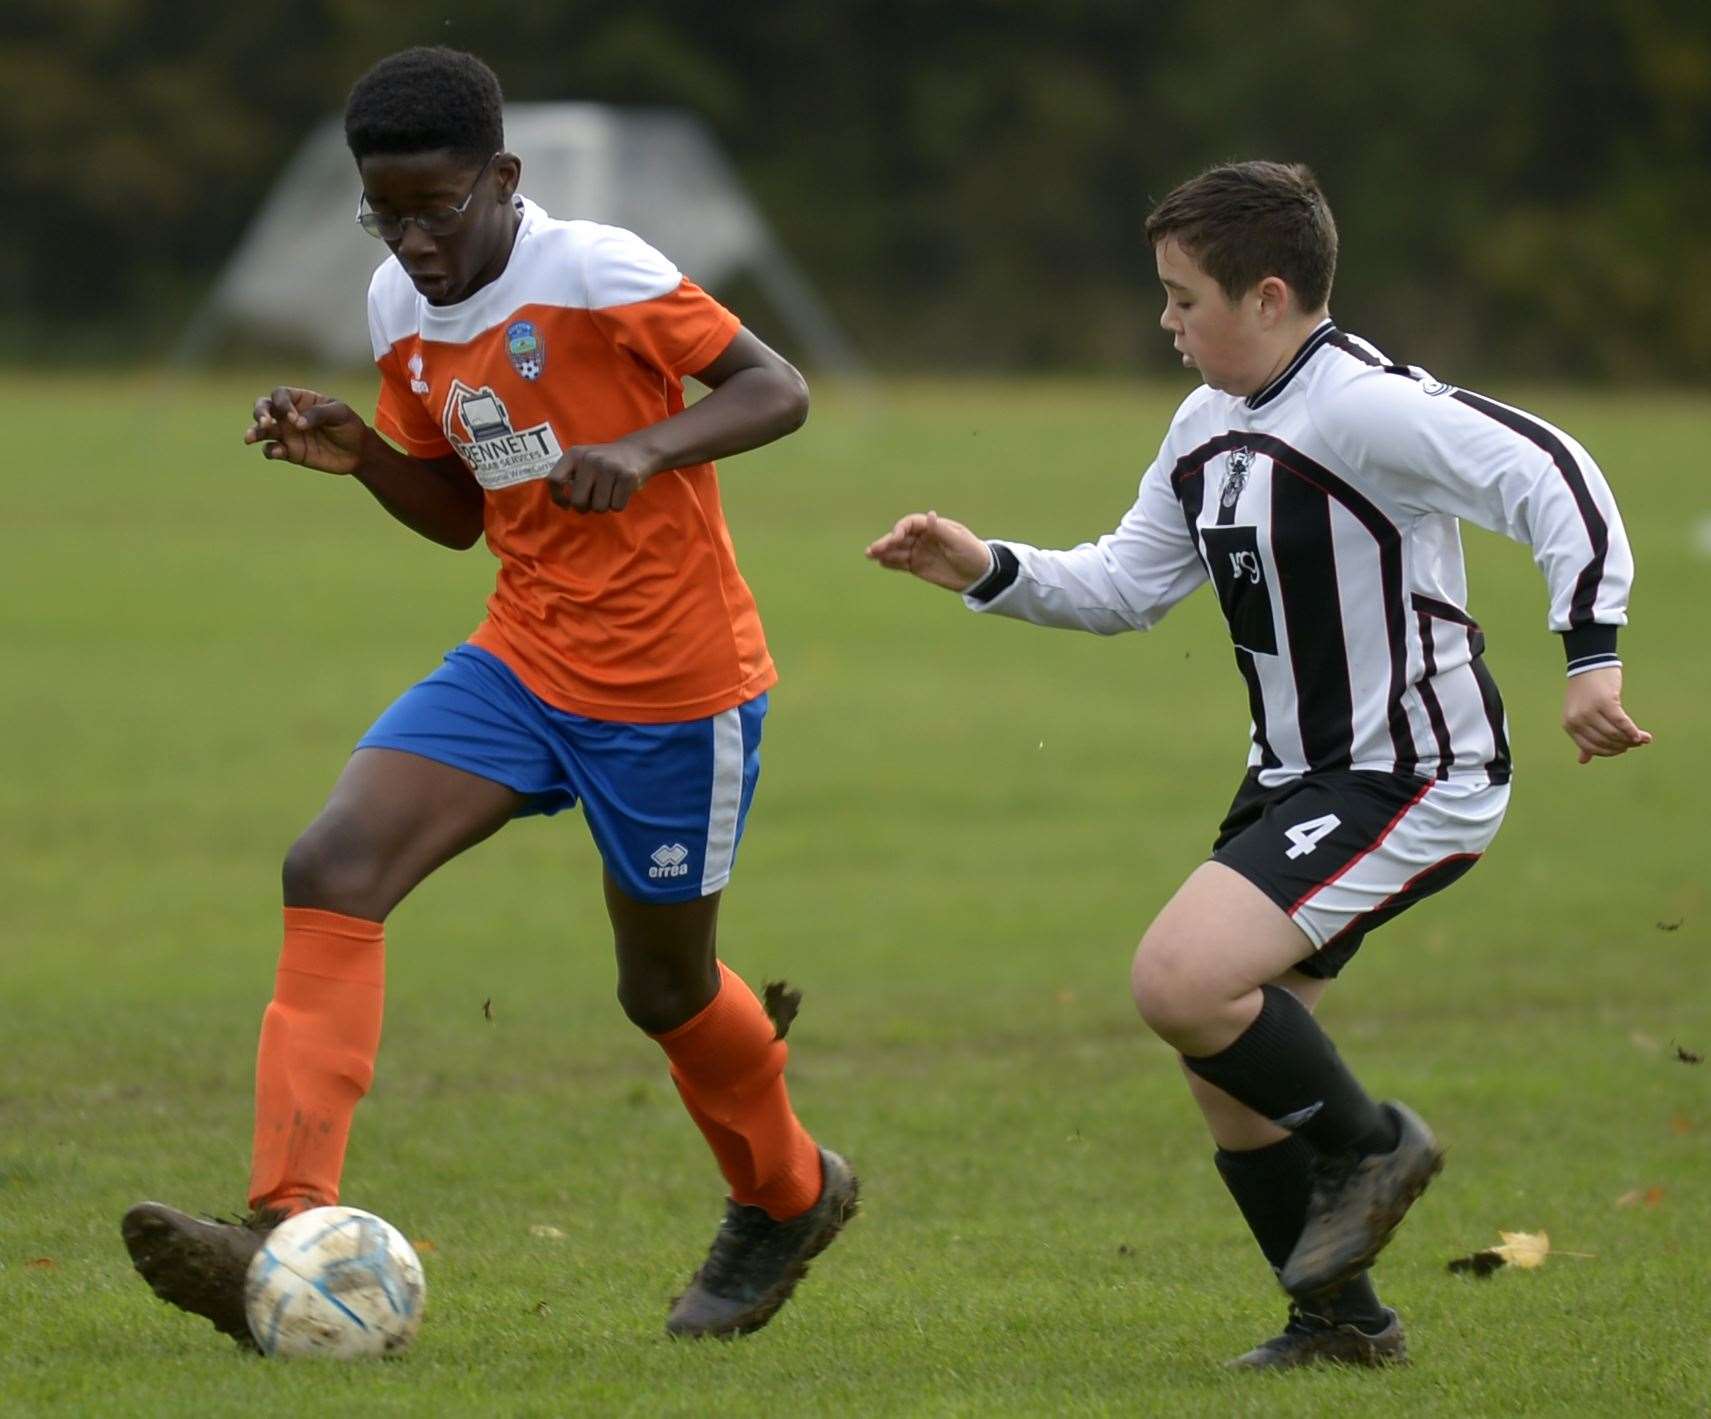 Cuxton 1991 Dynamos under-13s (orange) on the ball against Milton & Fulston United Zebras under-13s. Picture: Barry Goodwin (42936769)